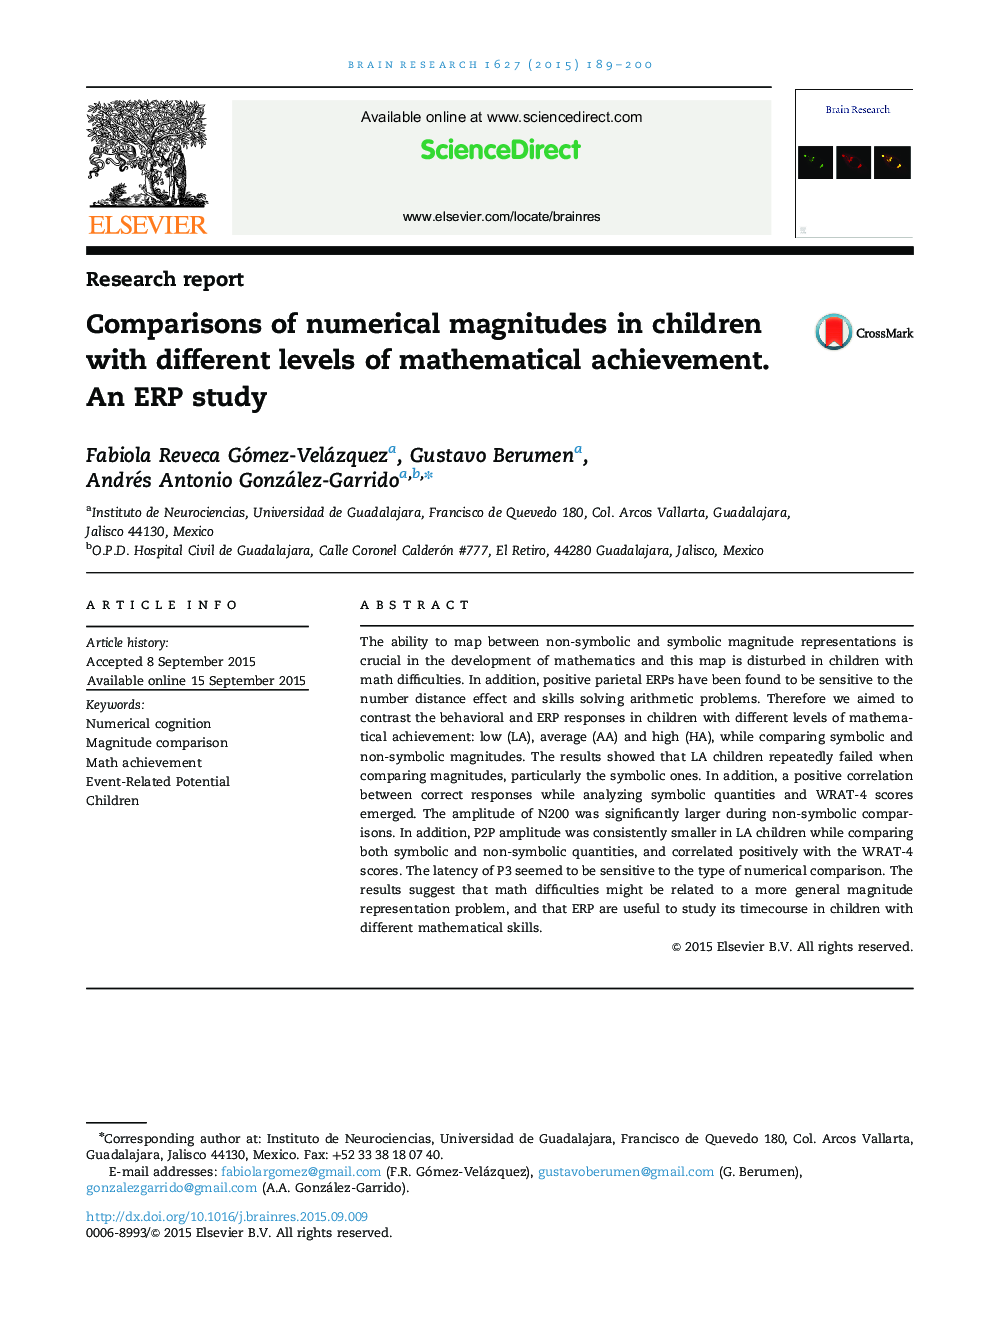 Comparisons of numerical magnitudes in children with different levels of mathematical achievement. An ERP study